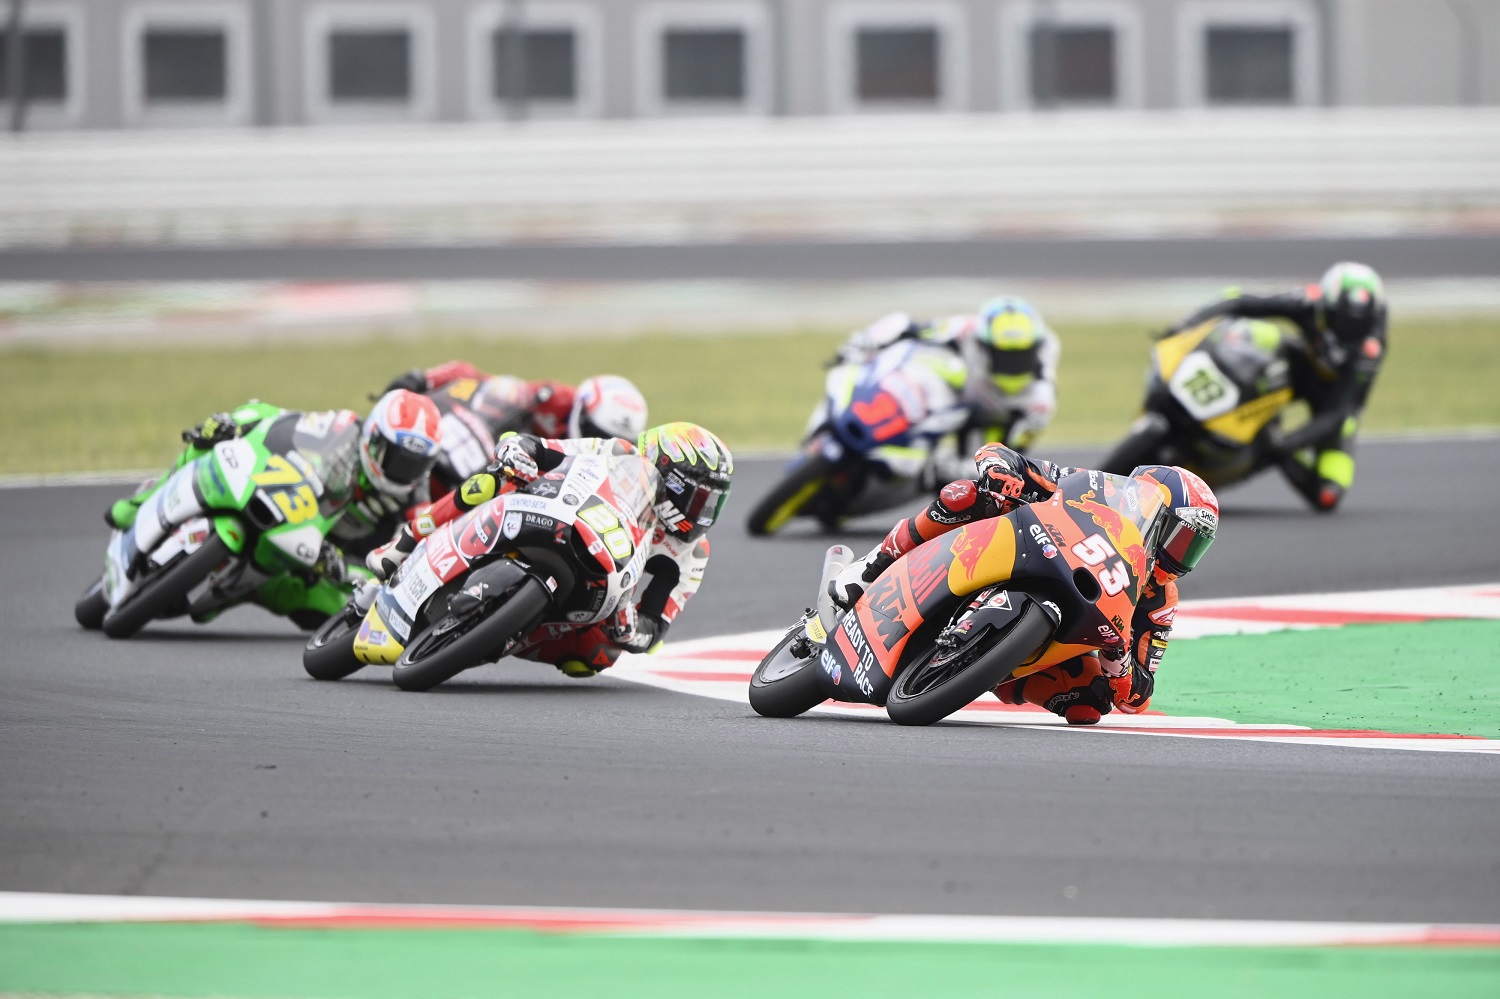 Deniz Oncu of Turkey leads the field during the Moto3 race during the MotoGP of San Marino competition on Sept. 19, 2021, in Italy.